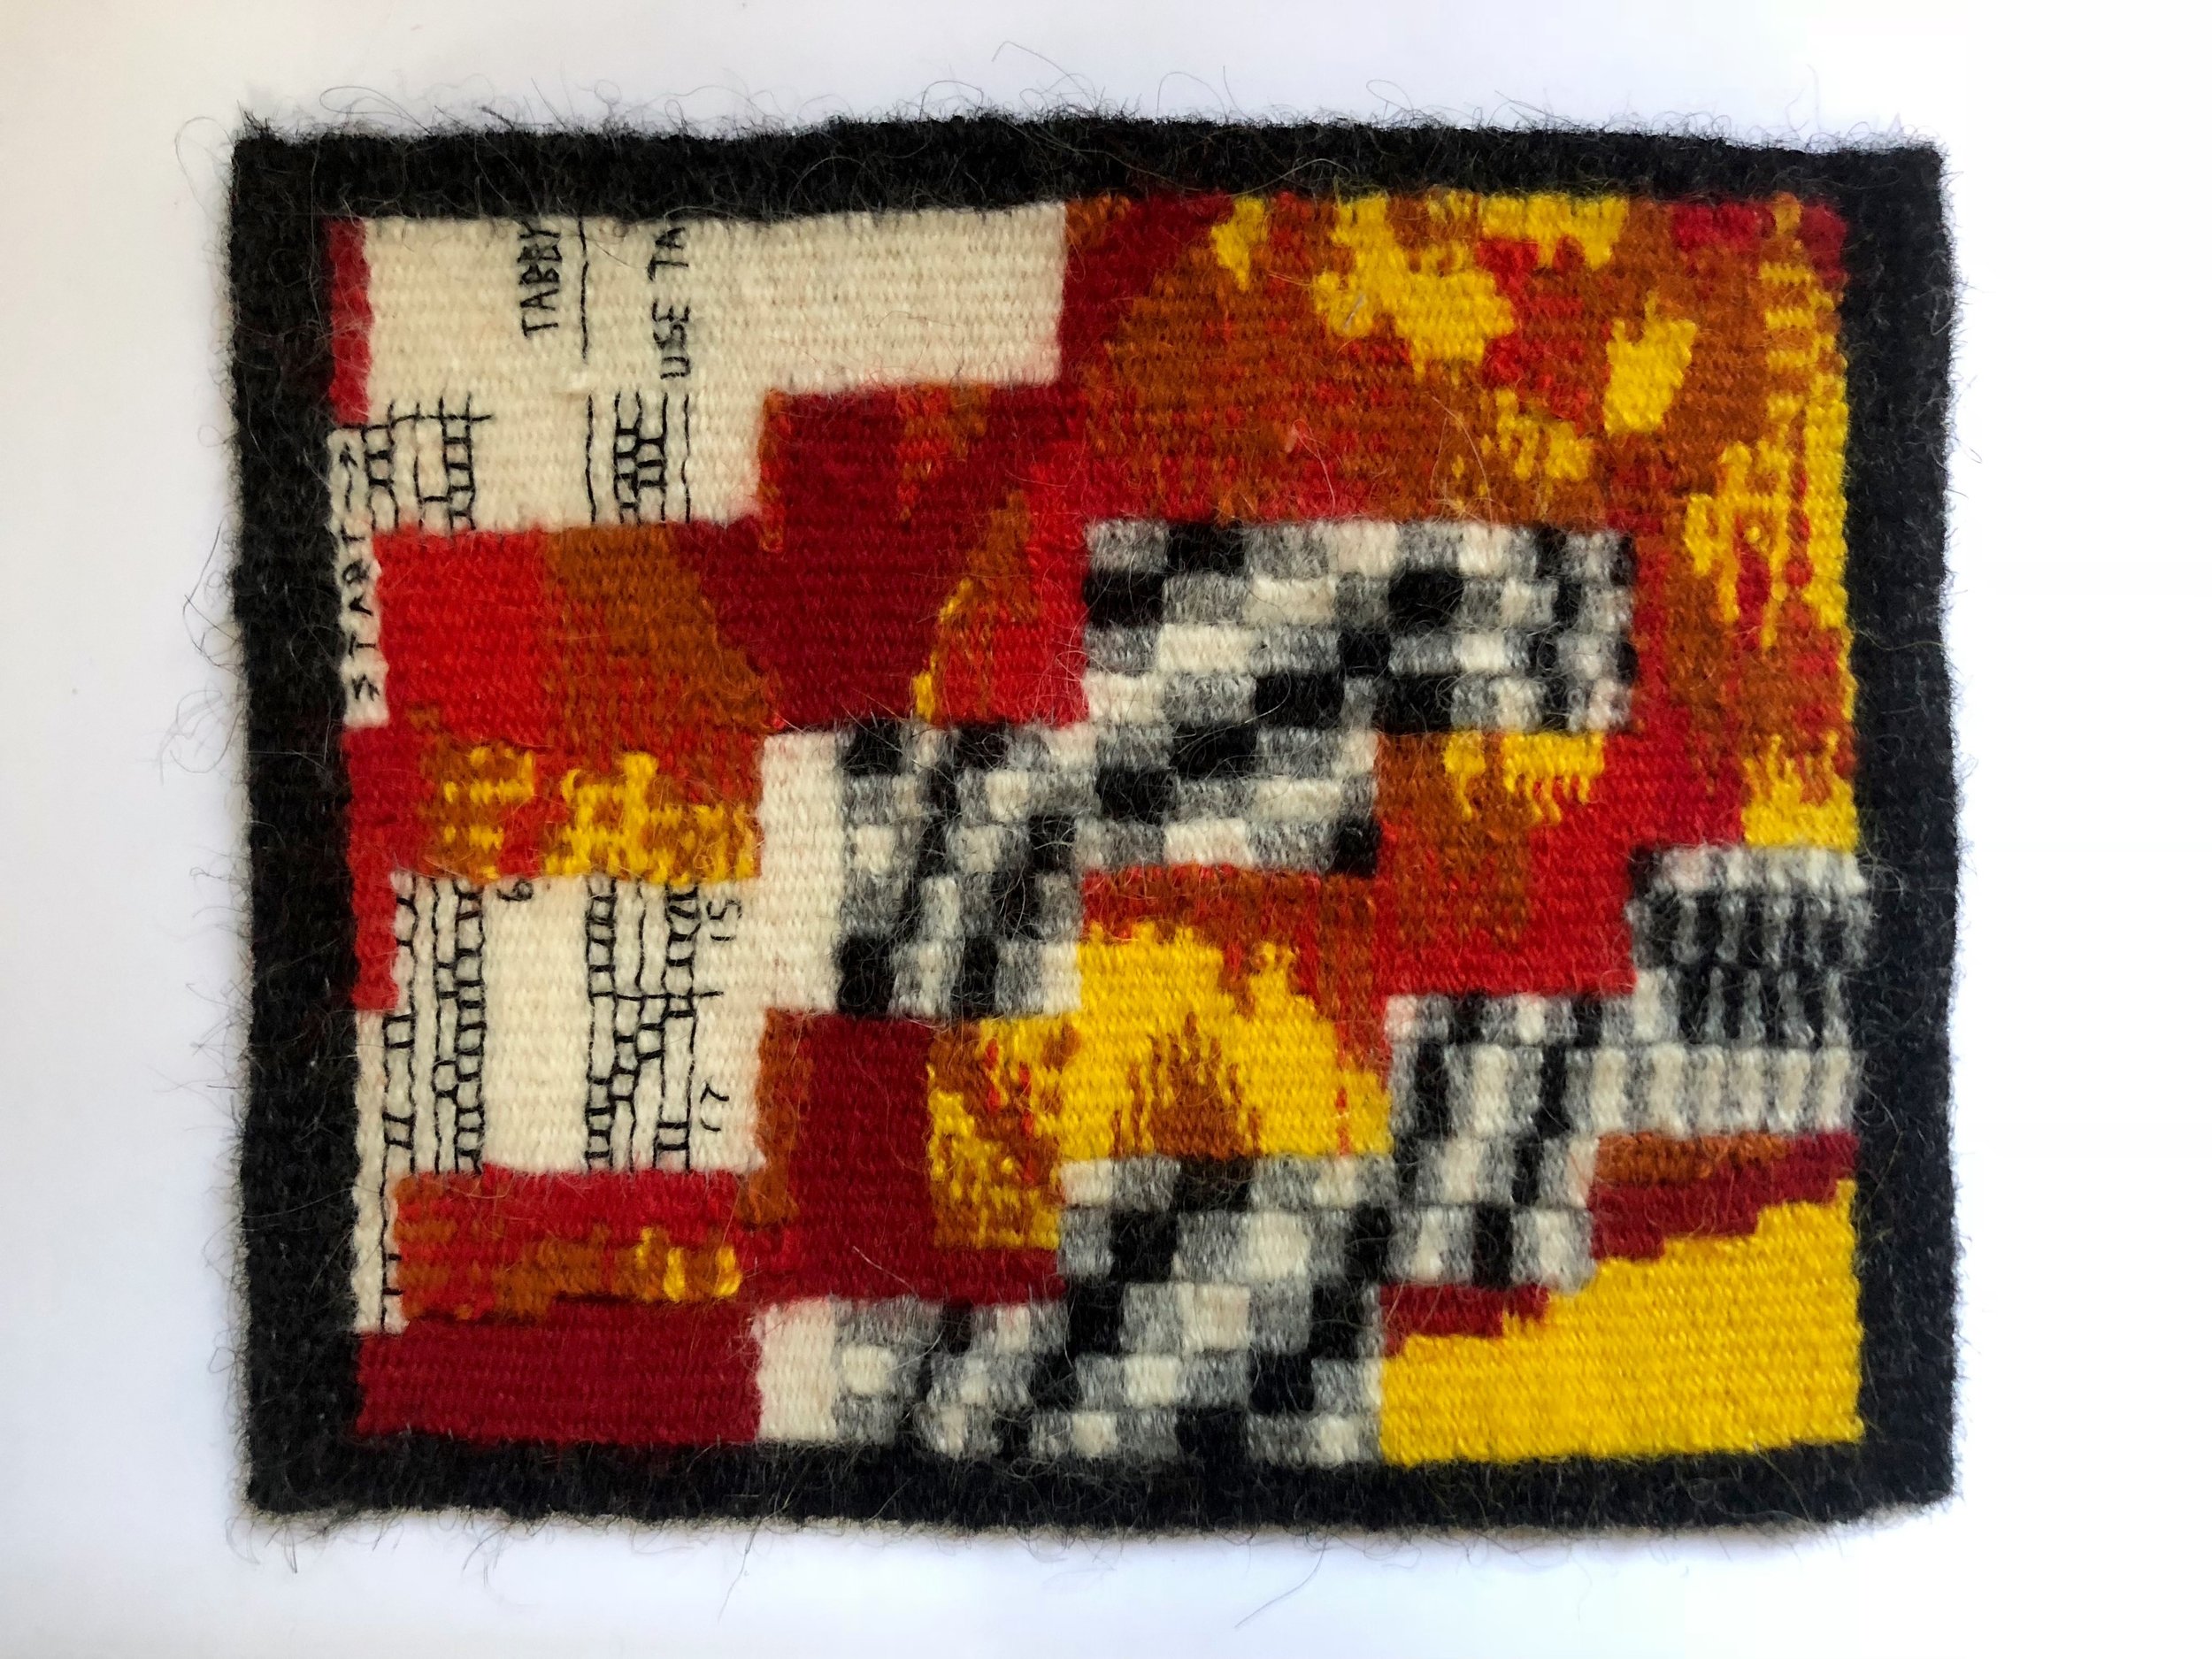   Blooming Leaf , 2018. Linen, wool, and cotton. 6” x 7.25”. Featured in  Small Tapestry International 6: Beyond the Edge . 